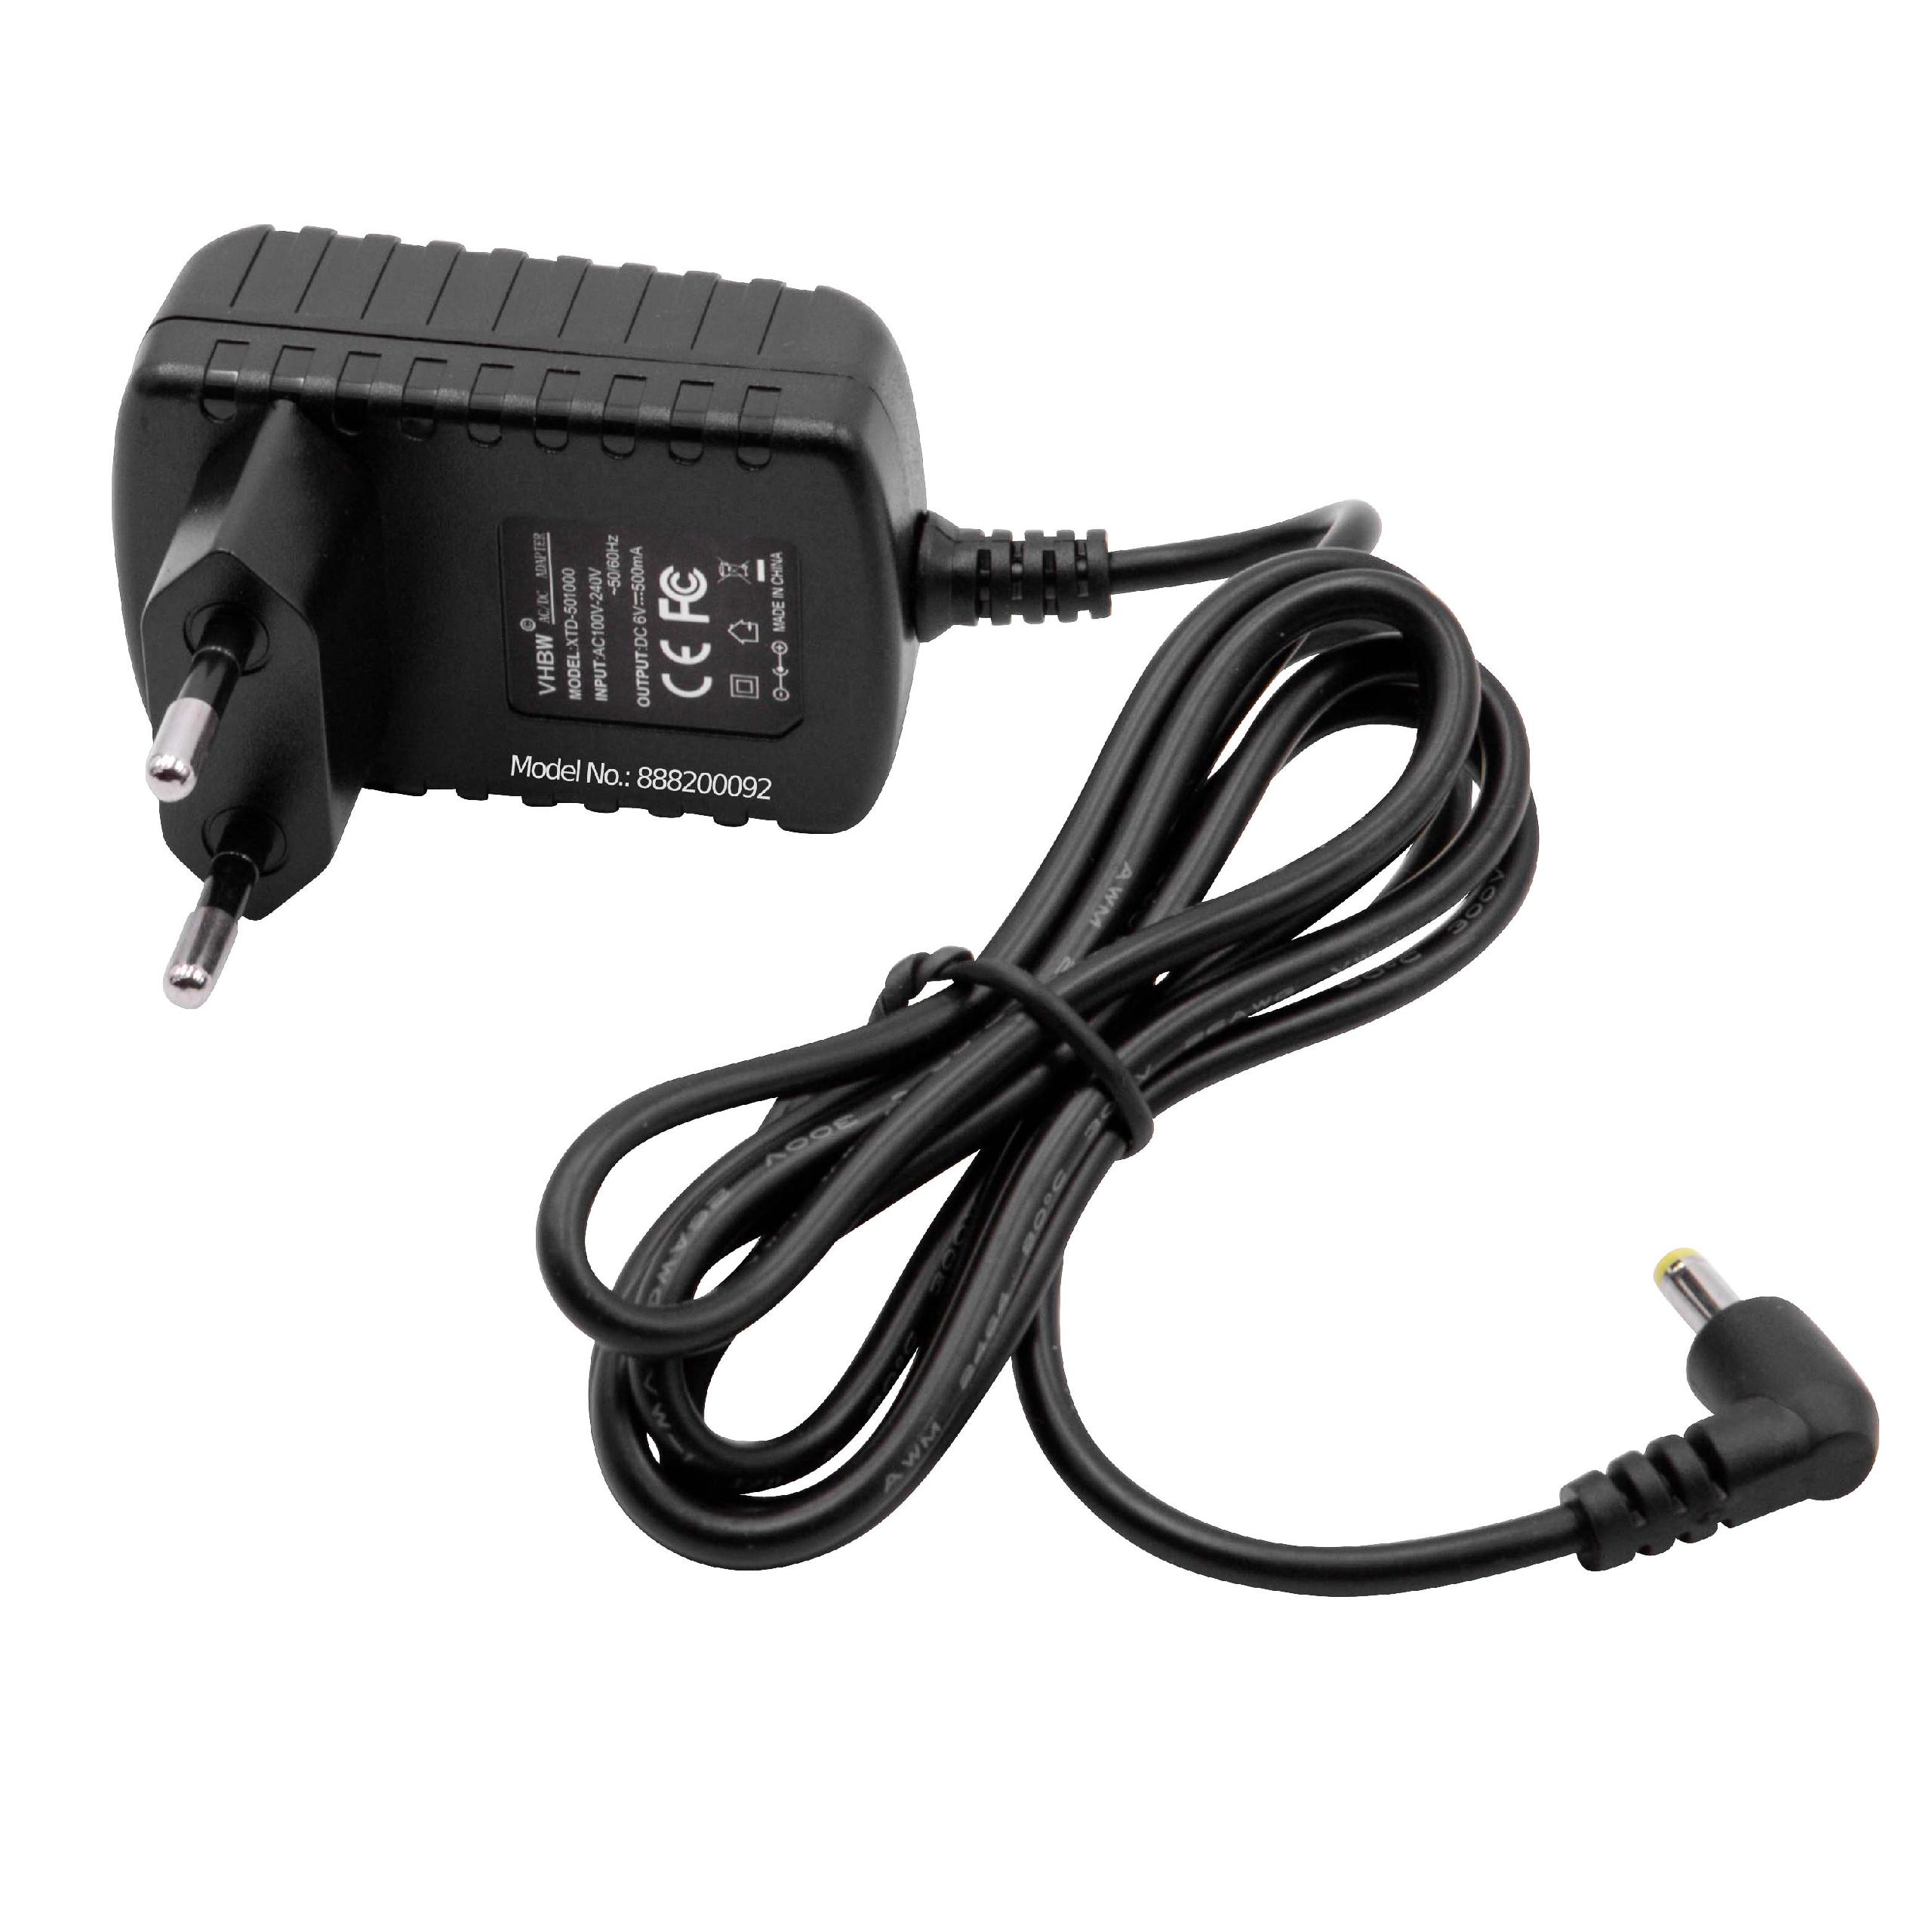 Power Adapter replaces Omron S(6024HW5SW) for OmronBlood Pressure Monitor - 111 cm